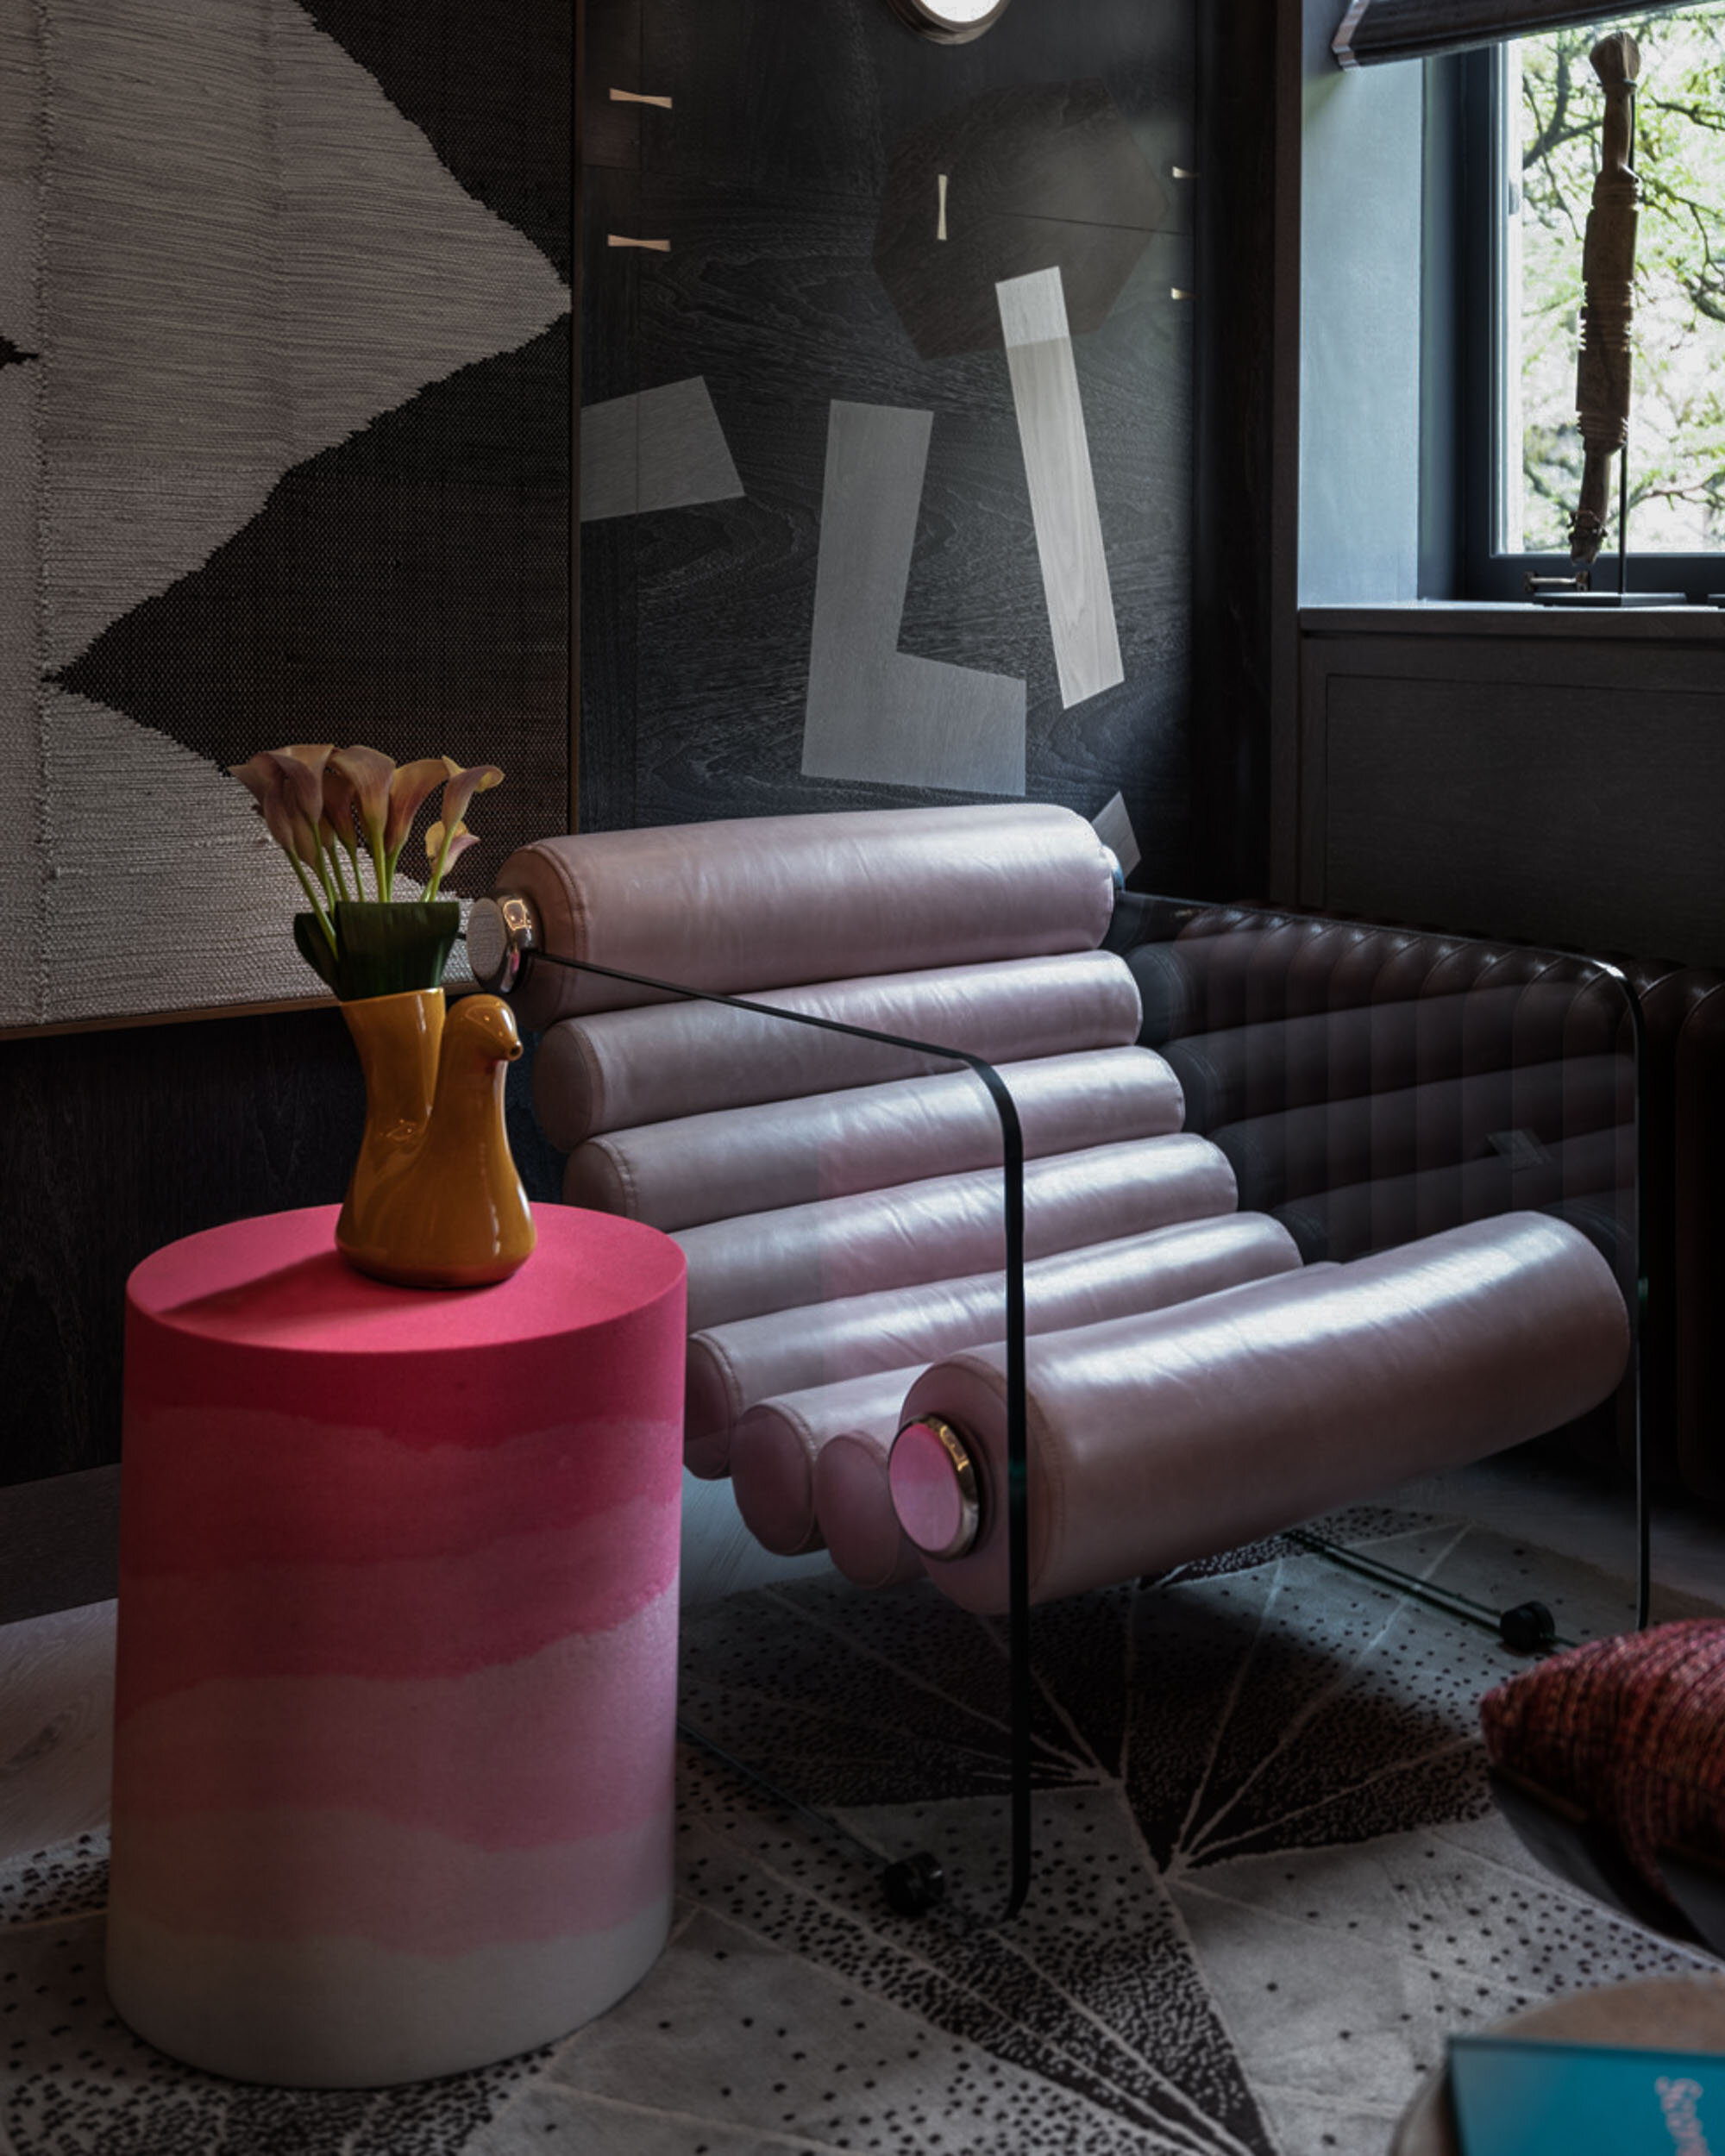  #bradsteinphoto, Highlights from the #kipsbayshowhouse19 The Pink Dragon Study by @katherinenewmandesign uses unique coloring relationships and materials that caught my eye: custom paneled wood wall, ceiling hung bronze and leather shelf system, wit